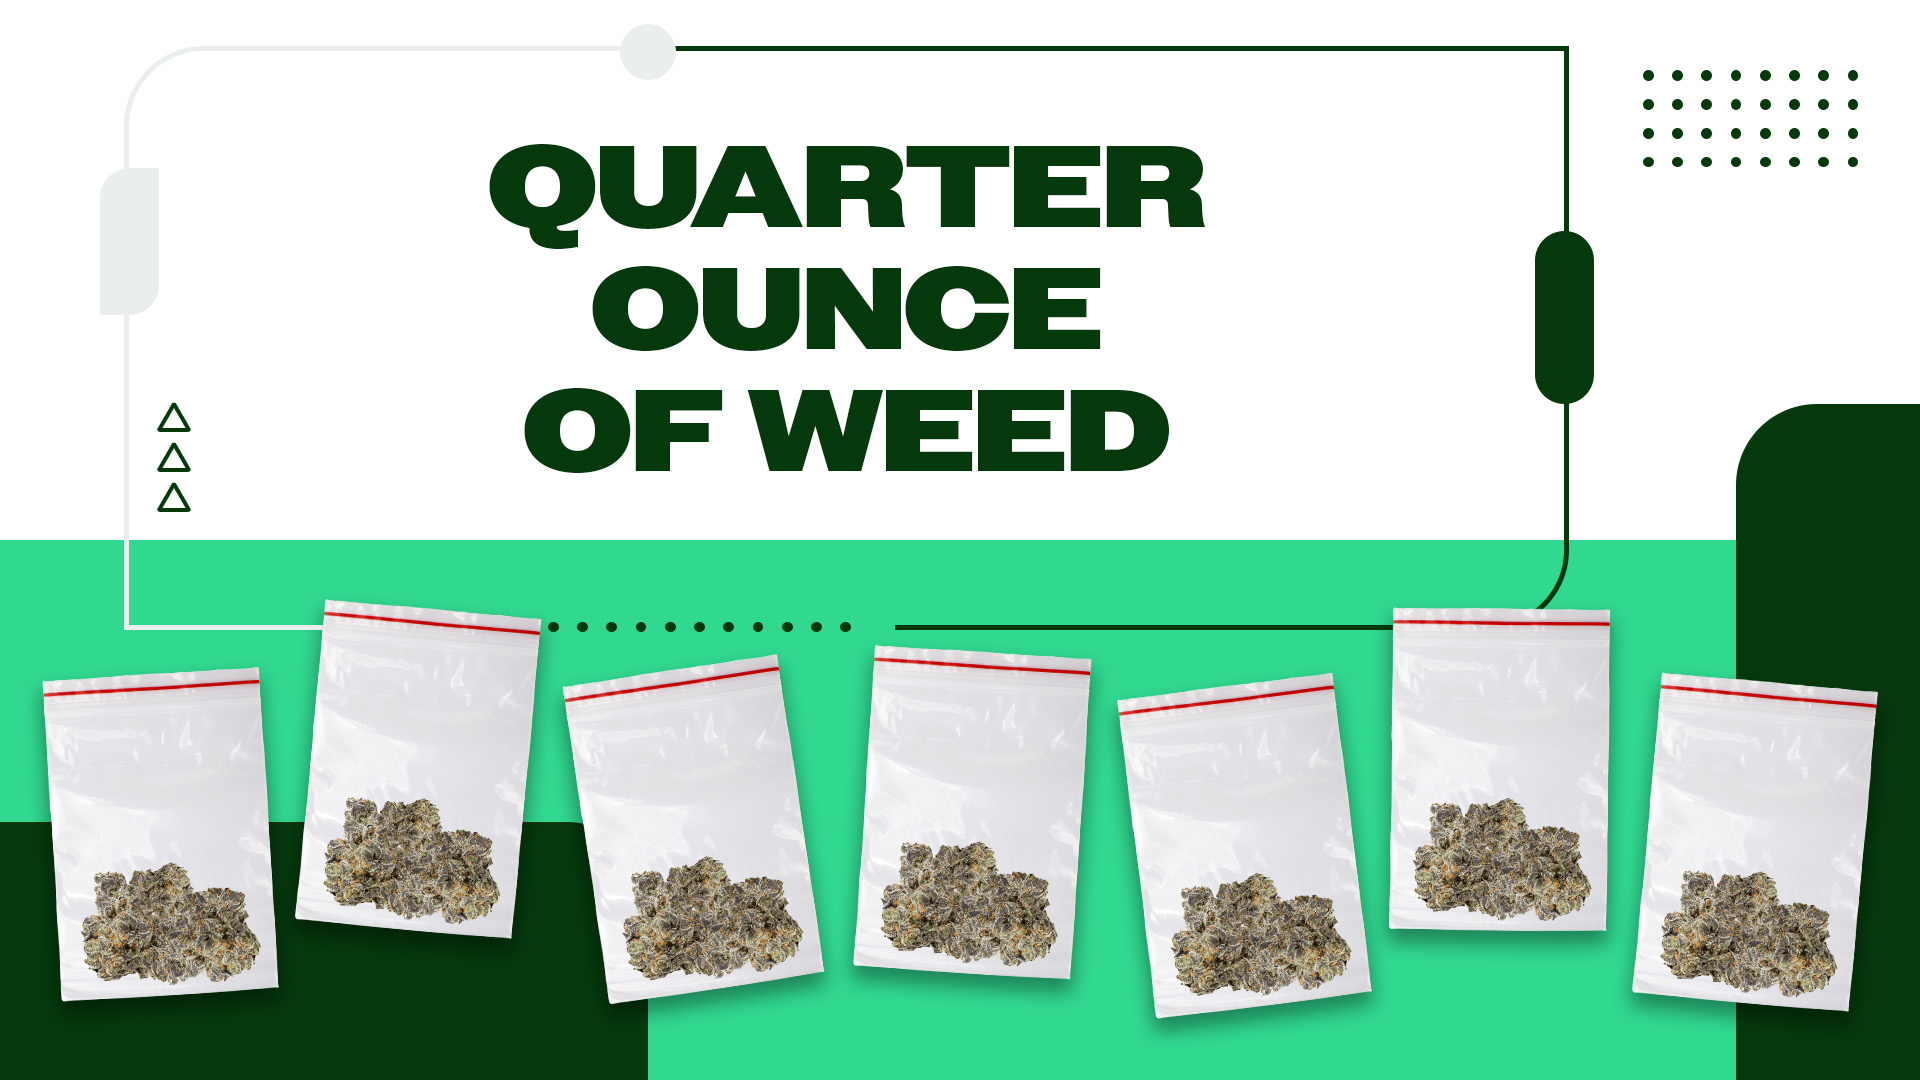 How Much is a Quarter Ounce of Weed?